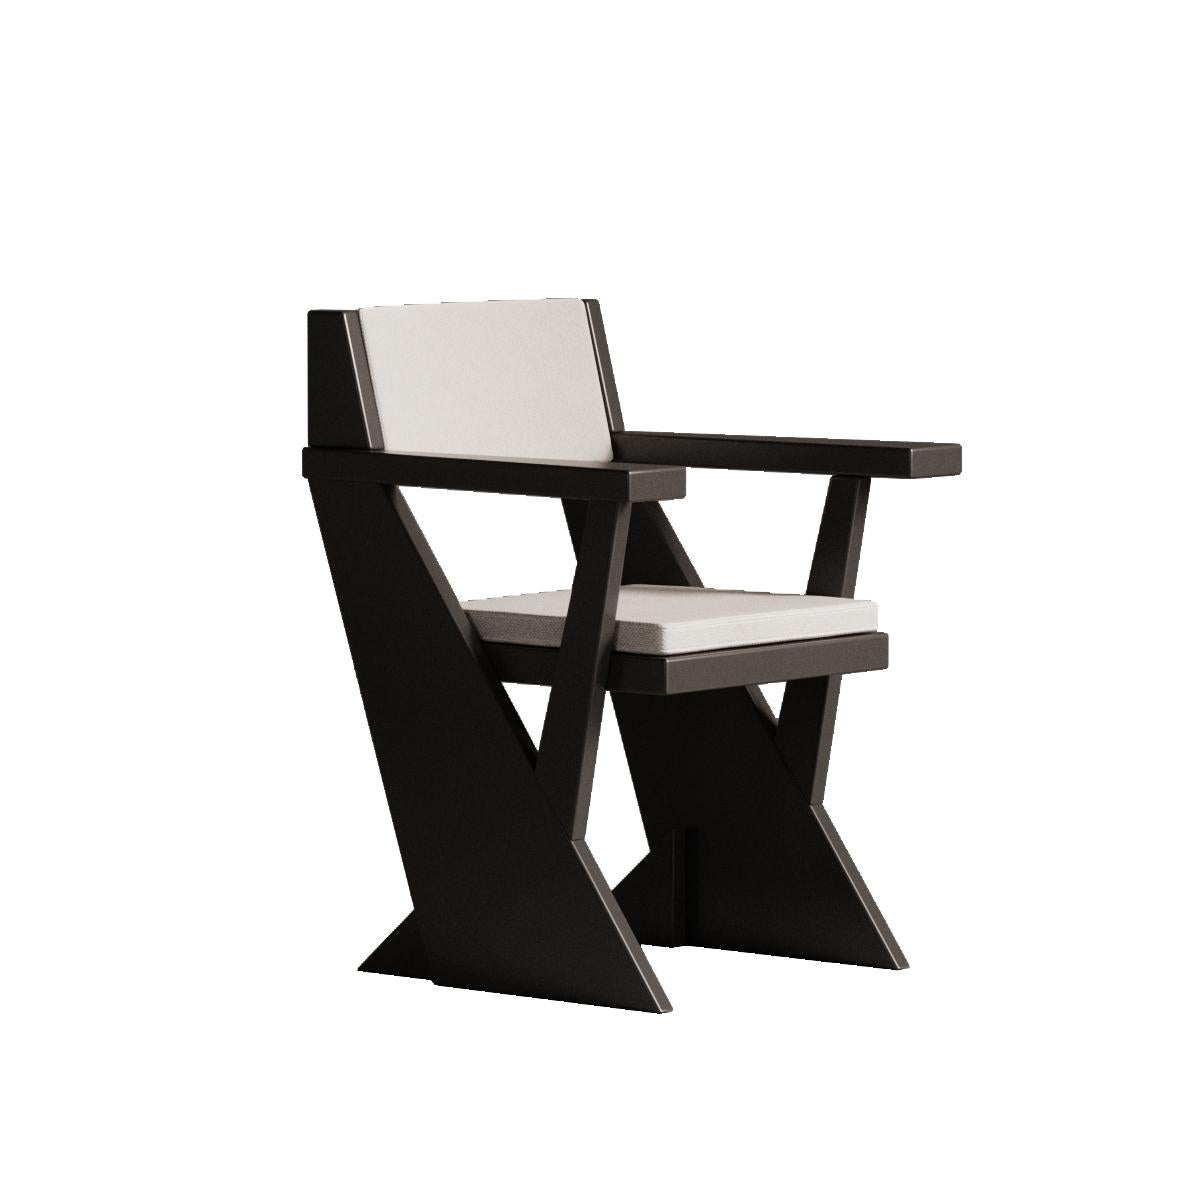 Black Pierre Chair by Plyus Design
Dimensions: D 63 x W 69 x H 88 cm
Materials:  Wood, HR foam, polyester wadding, fabric upholstery.



PLYUS Furniture creates pieces in collectible design segment. We create modern, ergonomic furniture in a